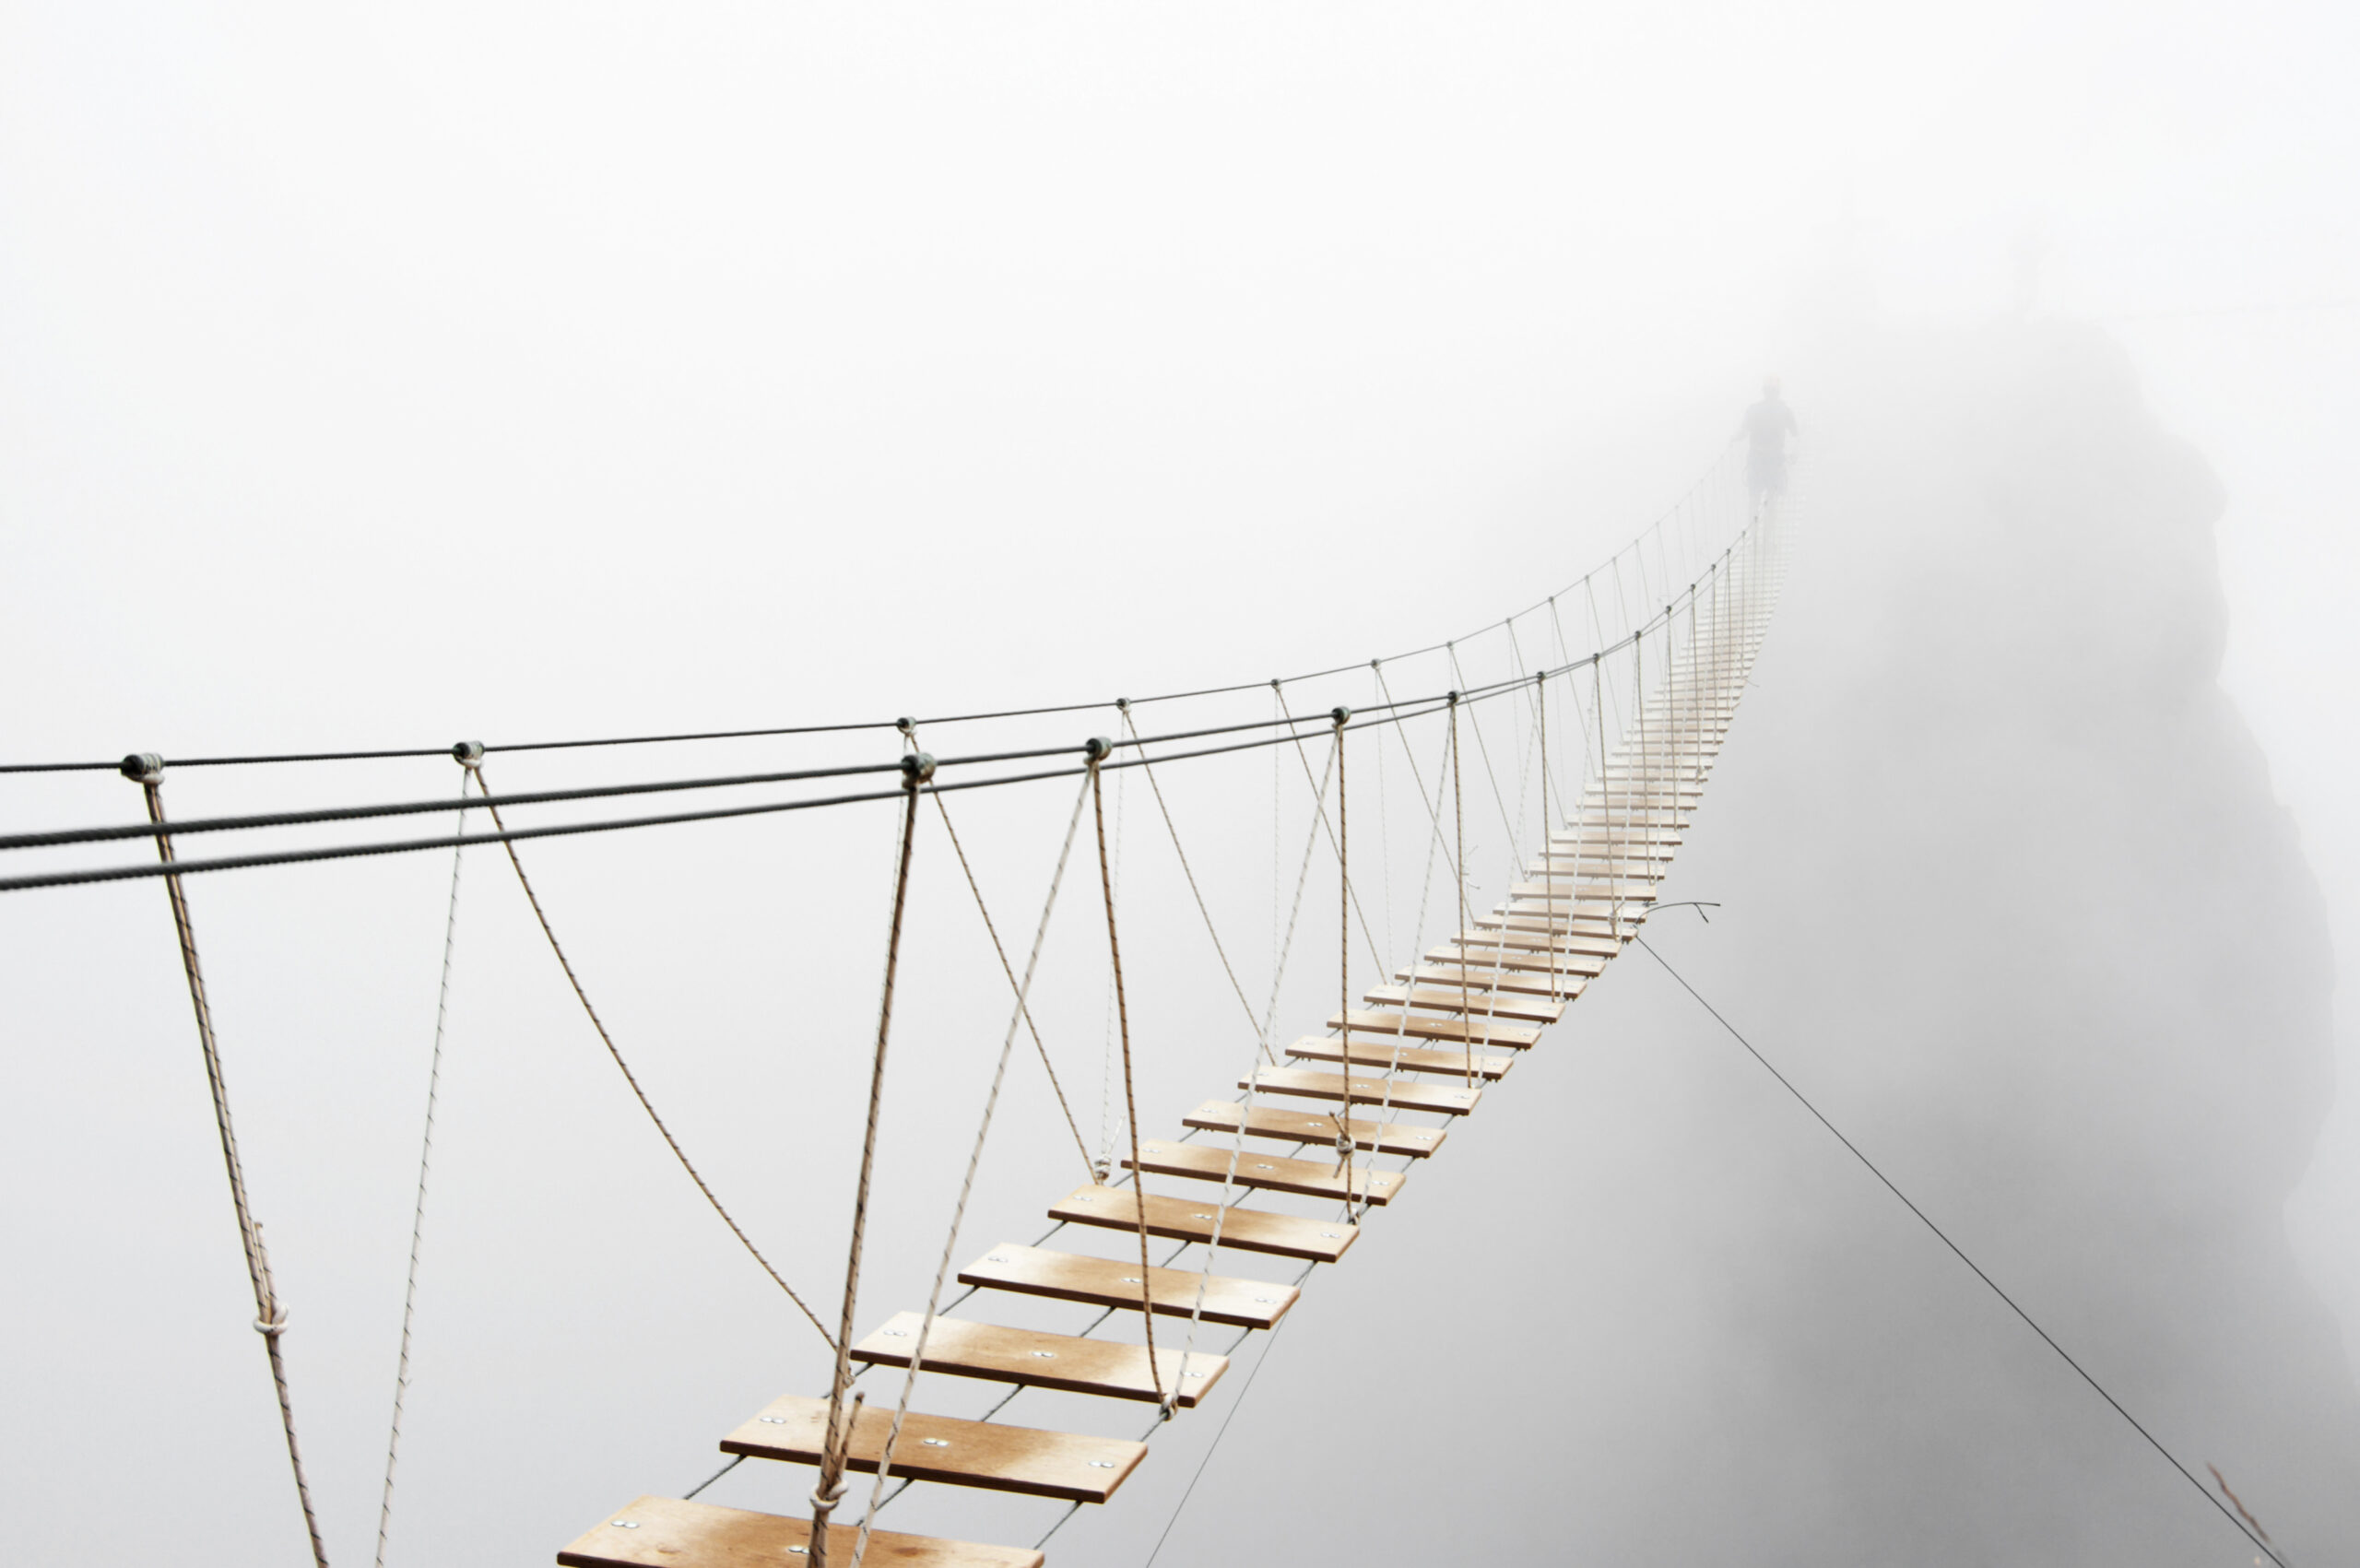 man walking on hanging bridge vanishing in fog | avoid mergers and acquisitions security and compliance pitfalls